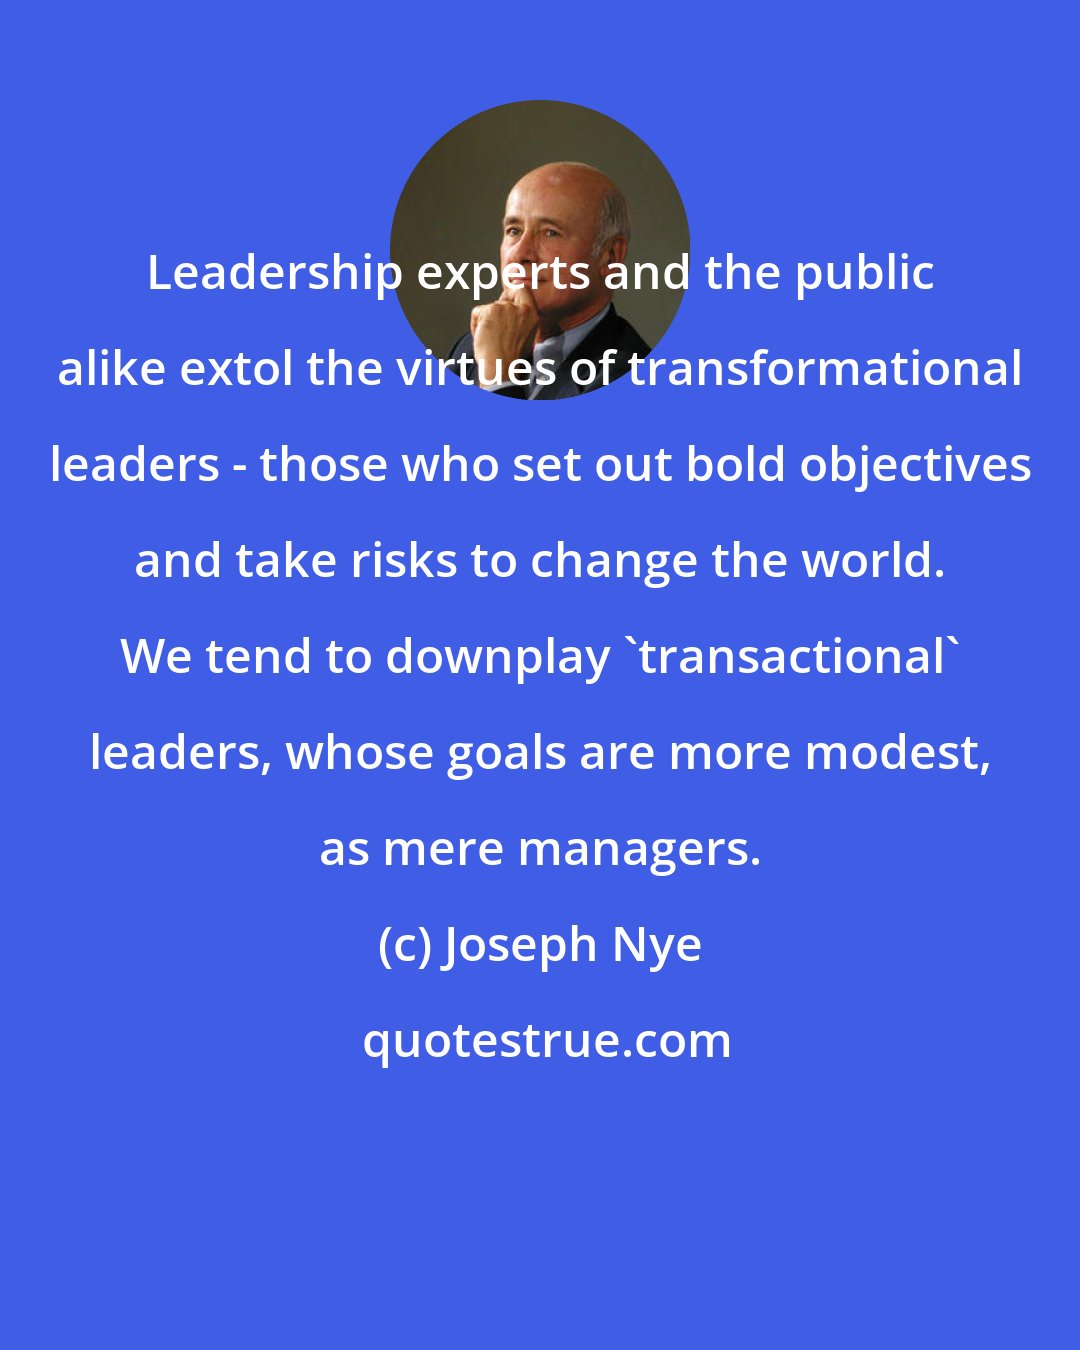 Joseph Nye: Leadership experts and the public alike extol the virtues of transformational leaders - those who set out bold objectives and take risks to change the world. We tend to downplay 'transactional' leaders, whose goals are more modest, as mere managers.